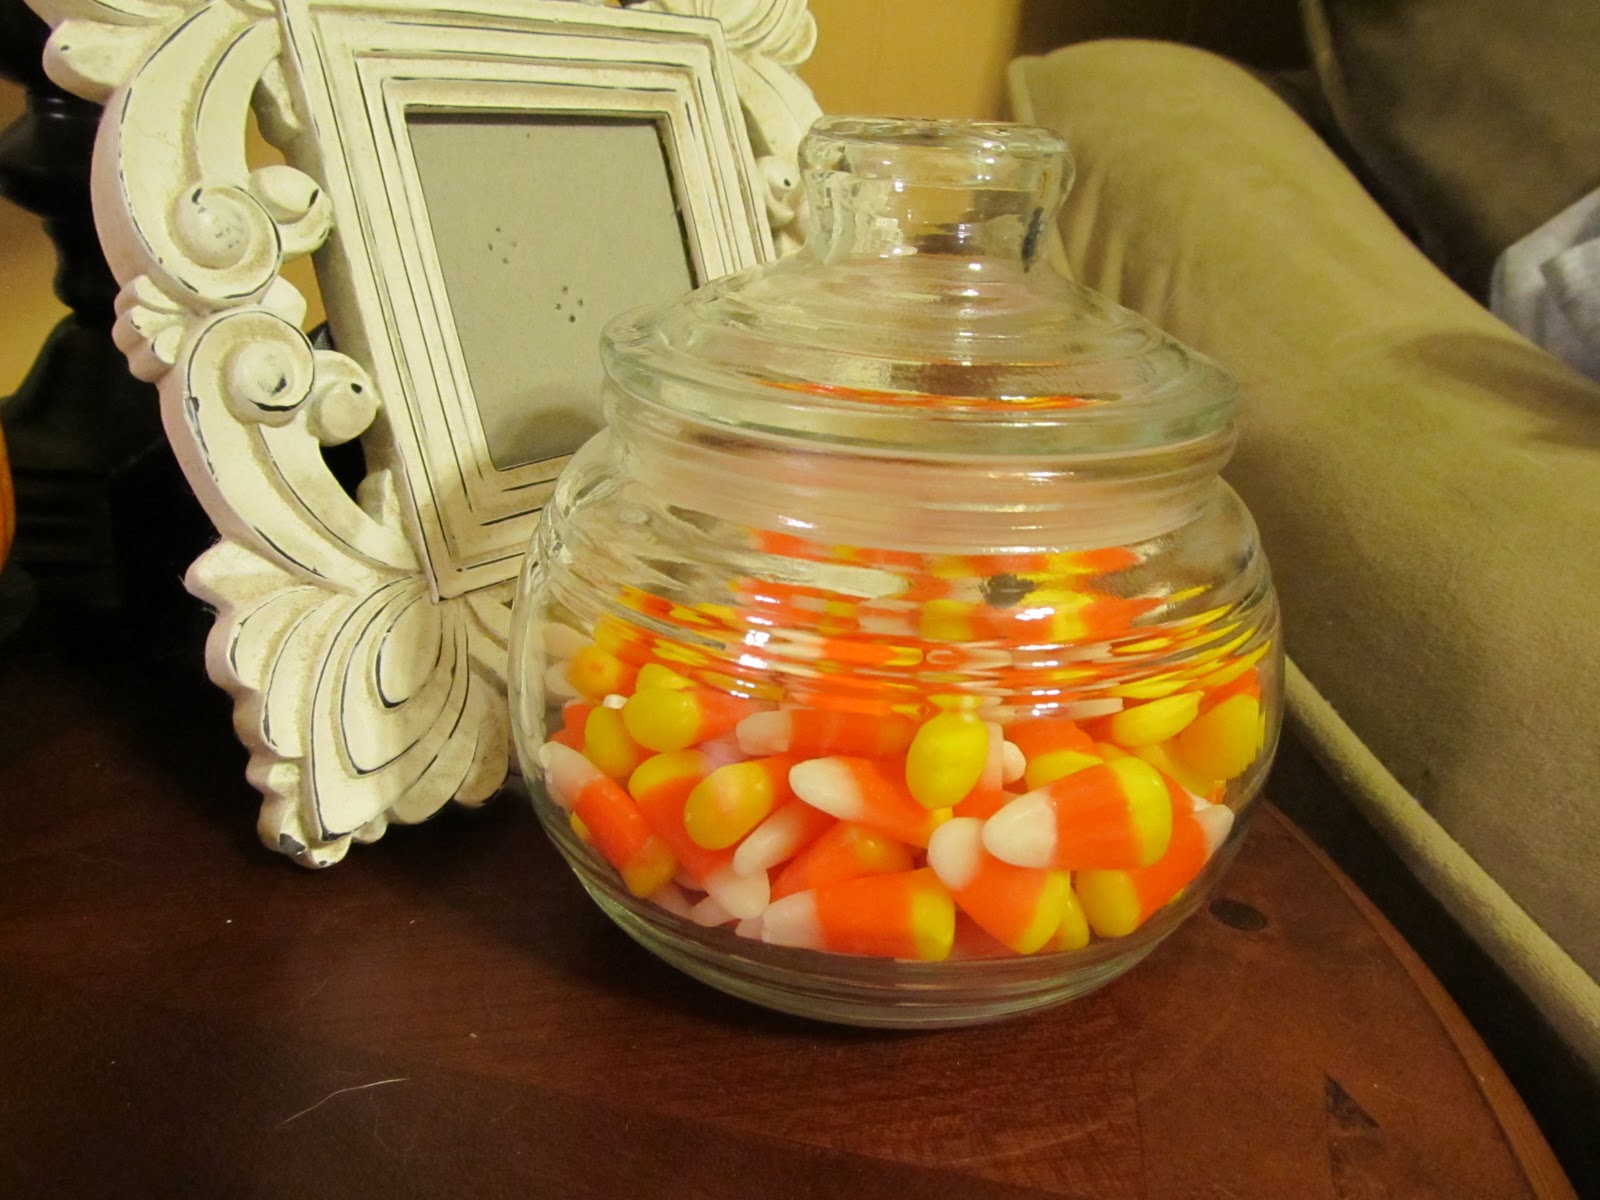 Deep in the Heart of Tejas: Candy corn!